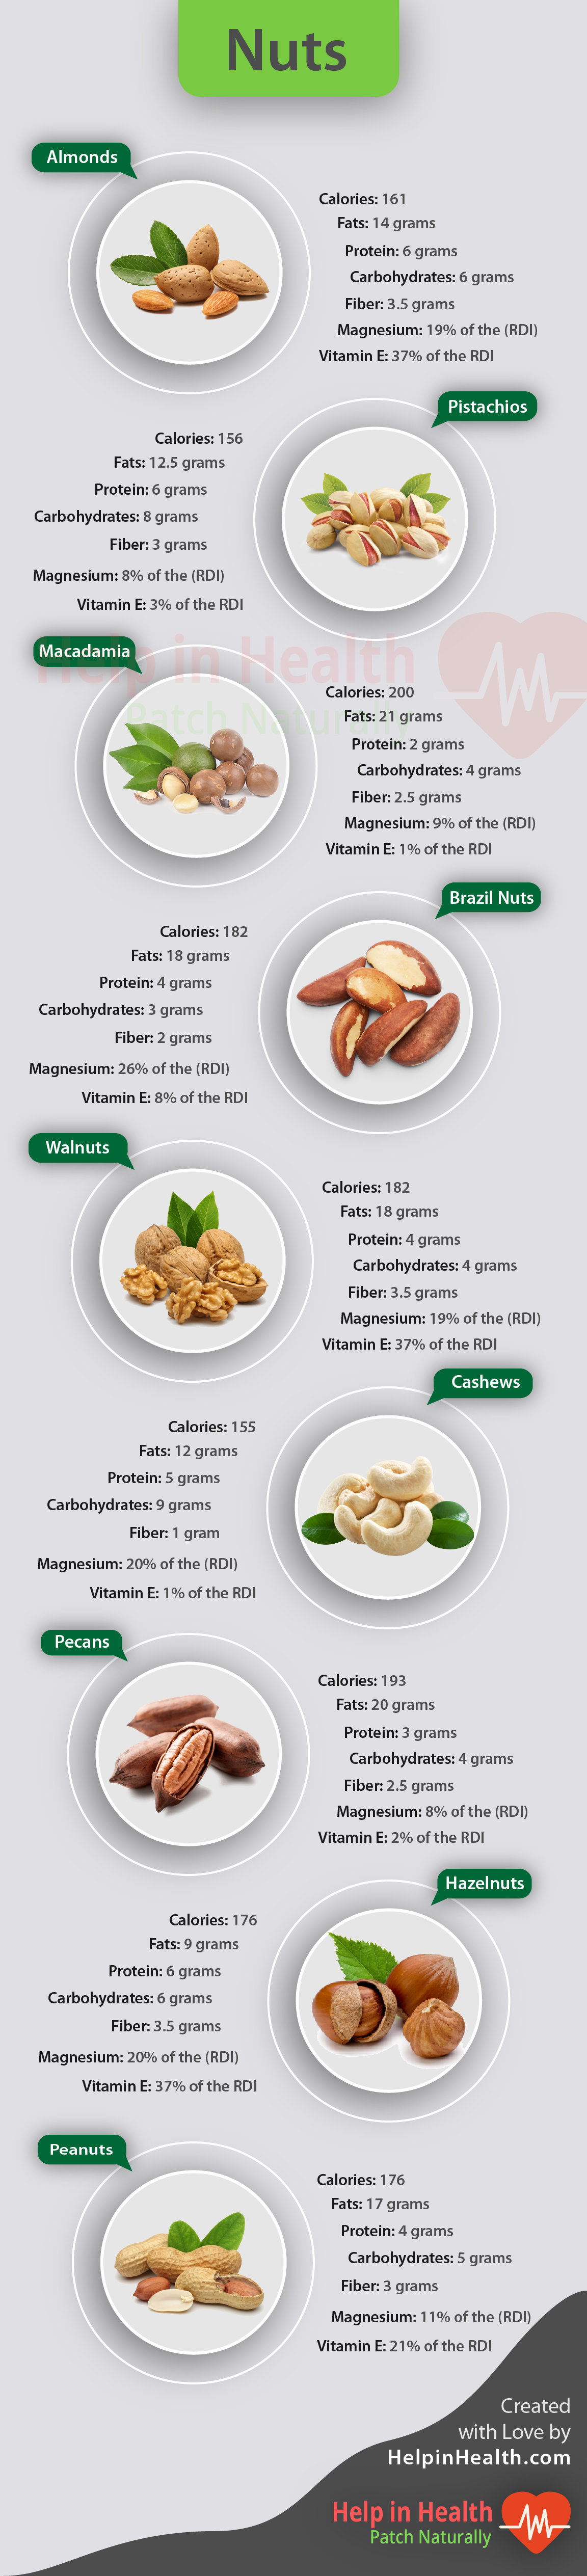 Nuts infographic helpinhealth.com 1 - Help in Health